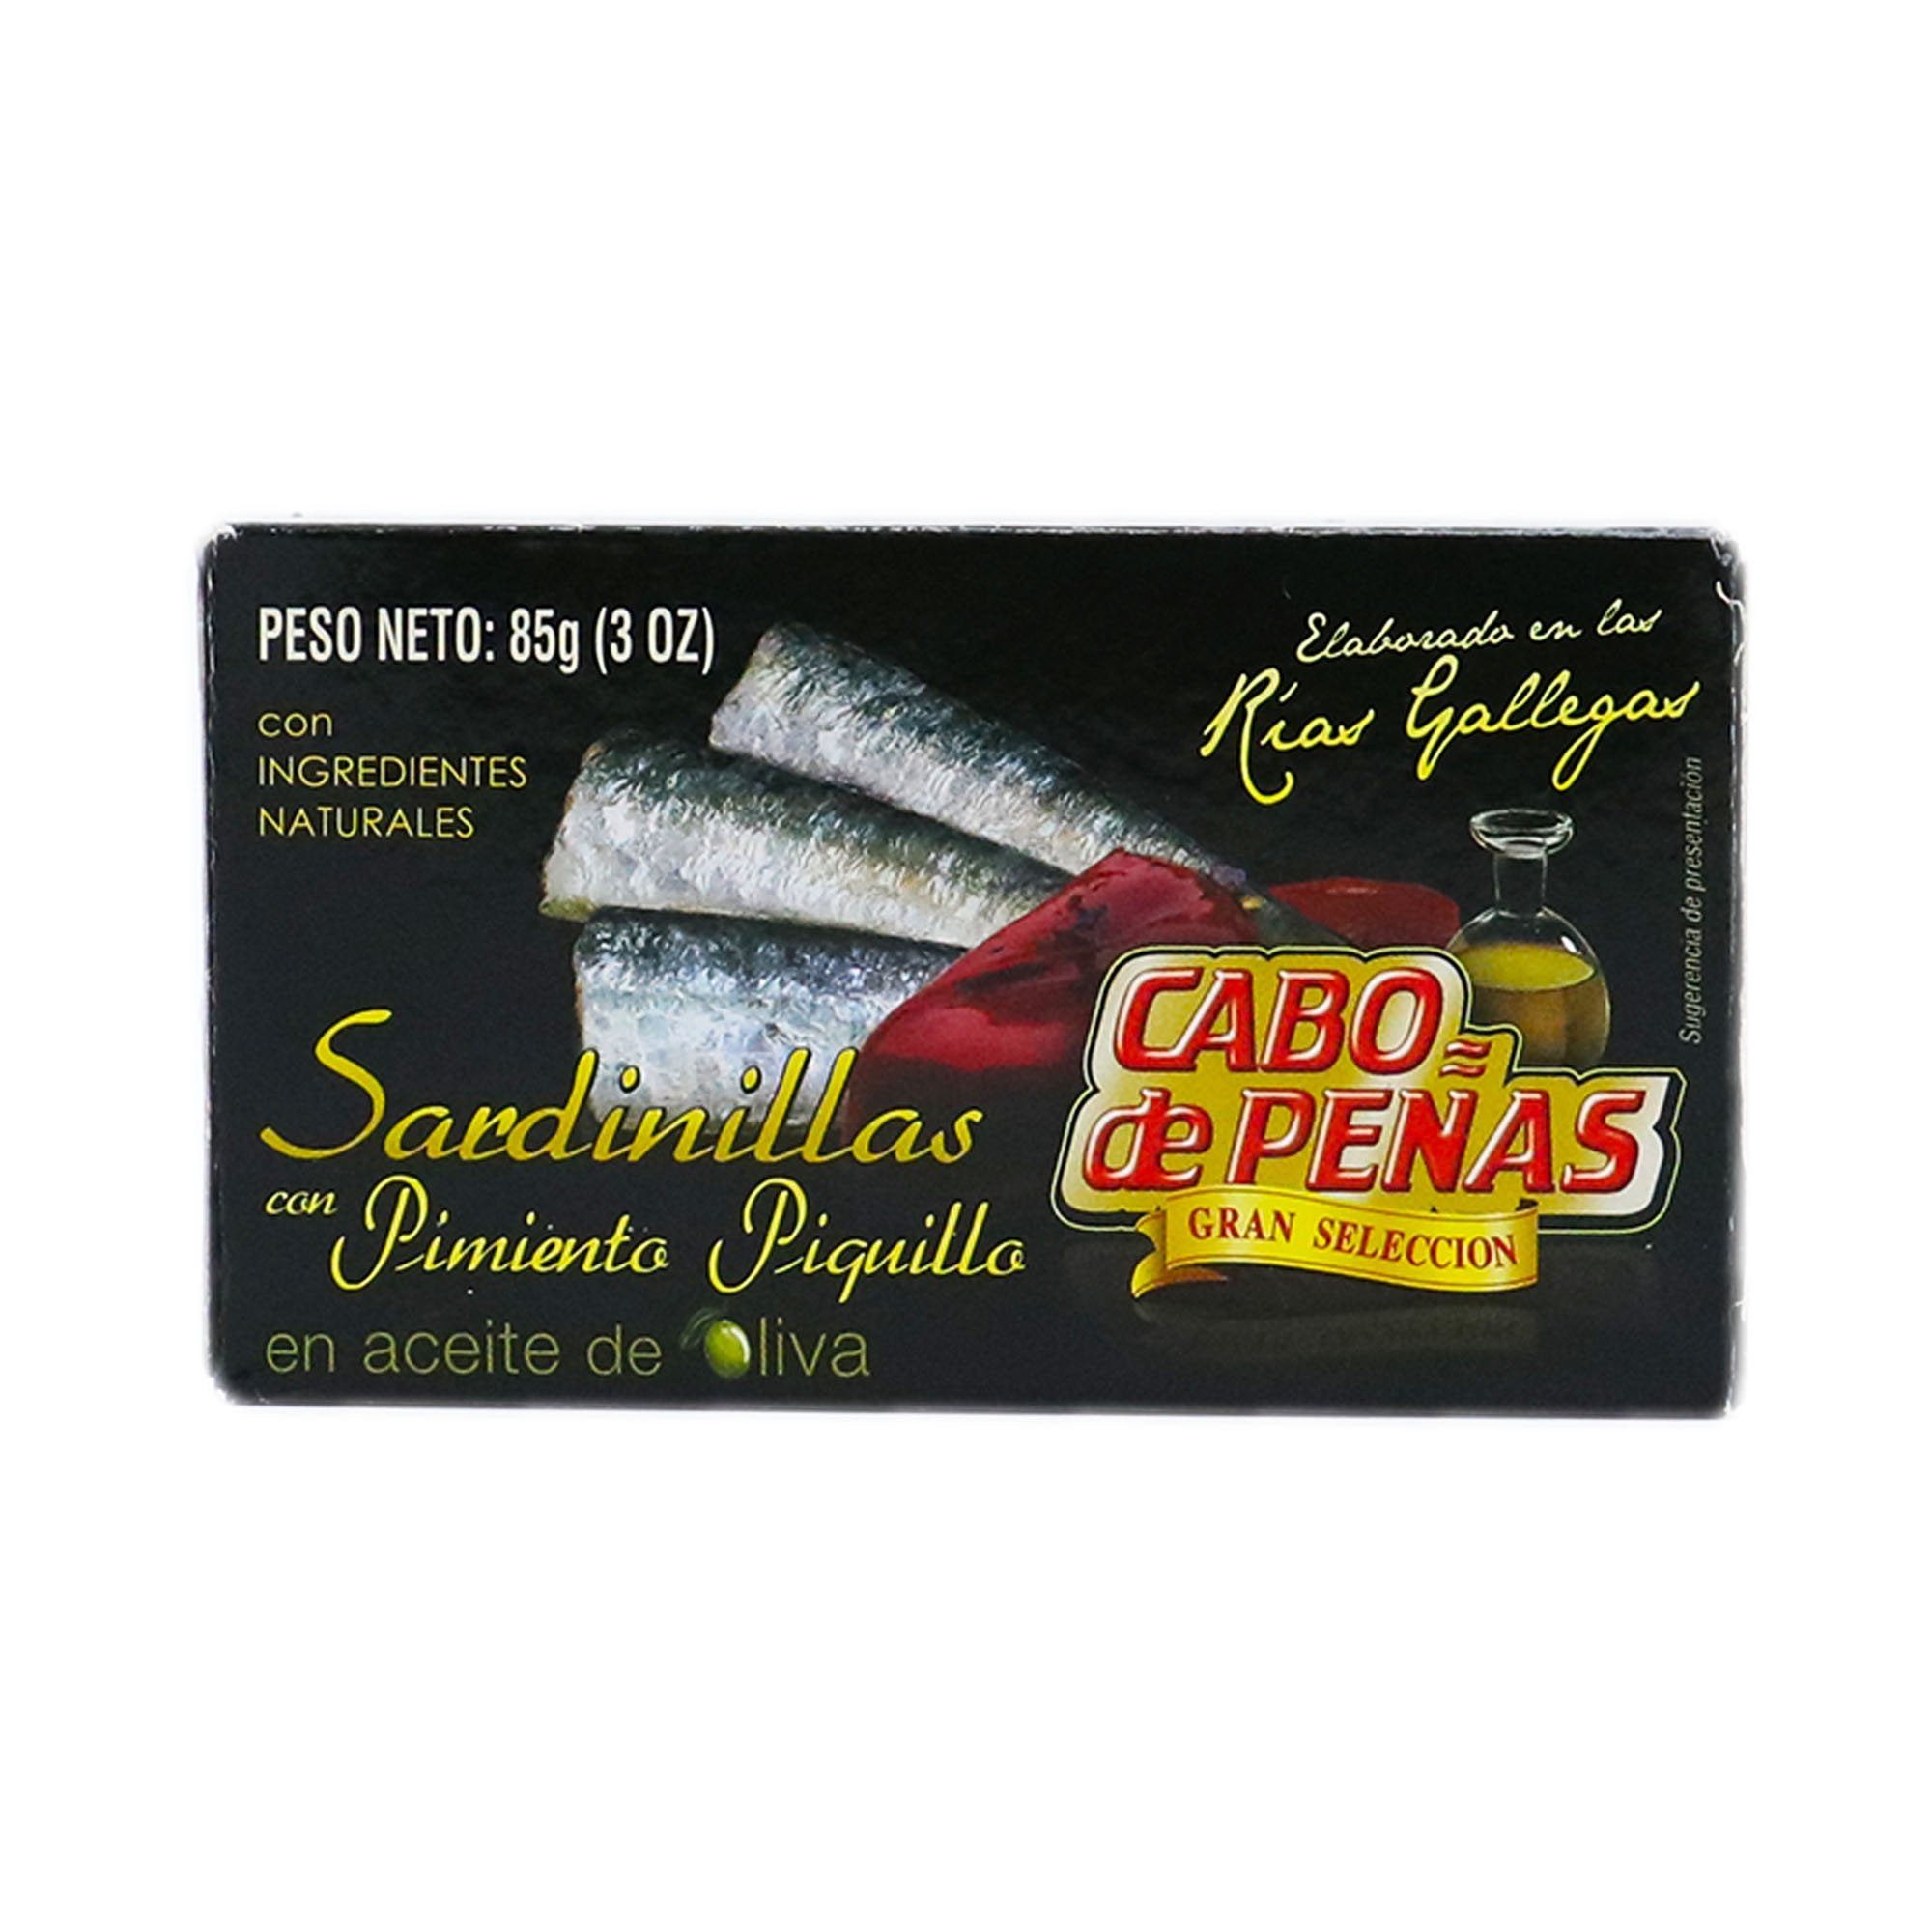 CABO DE PEÑAS Small Sardines in Olive Oil with Piquillo Peppers